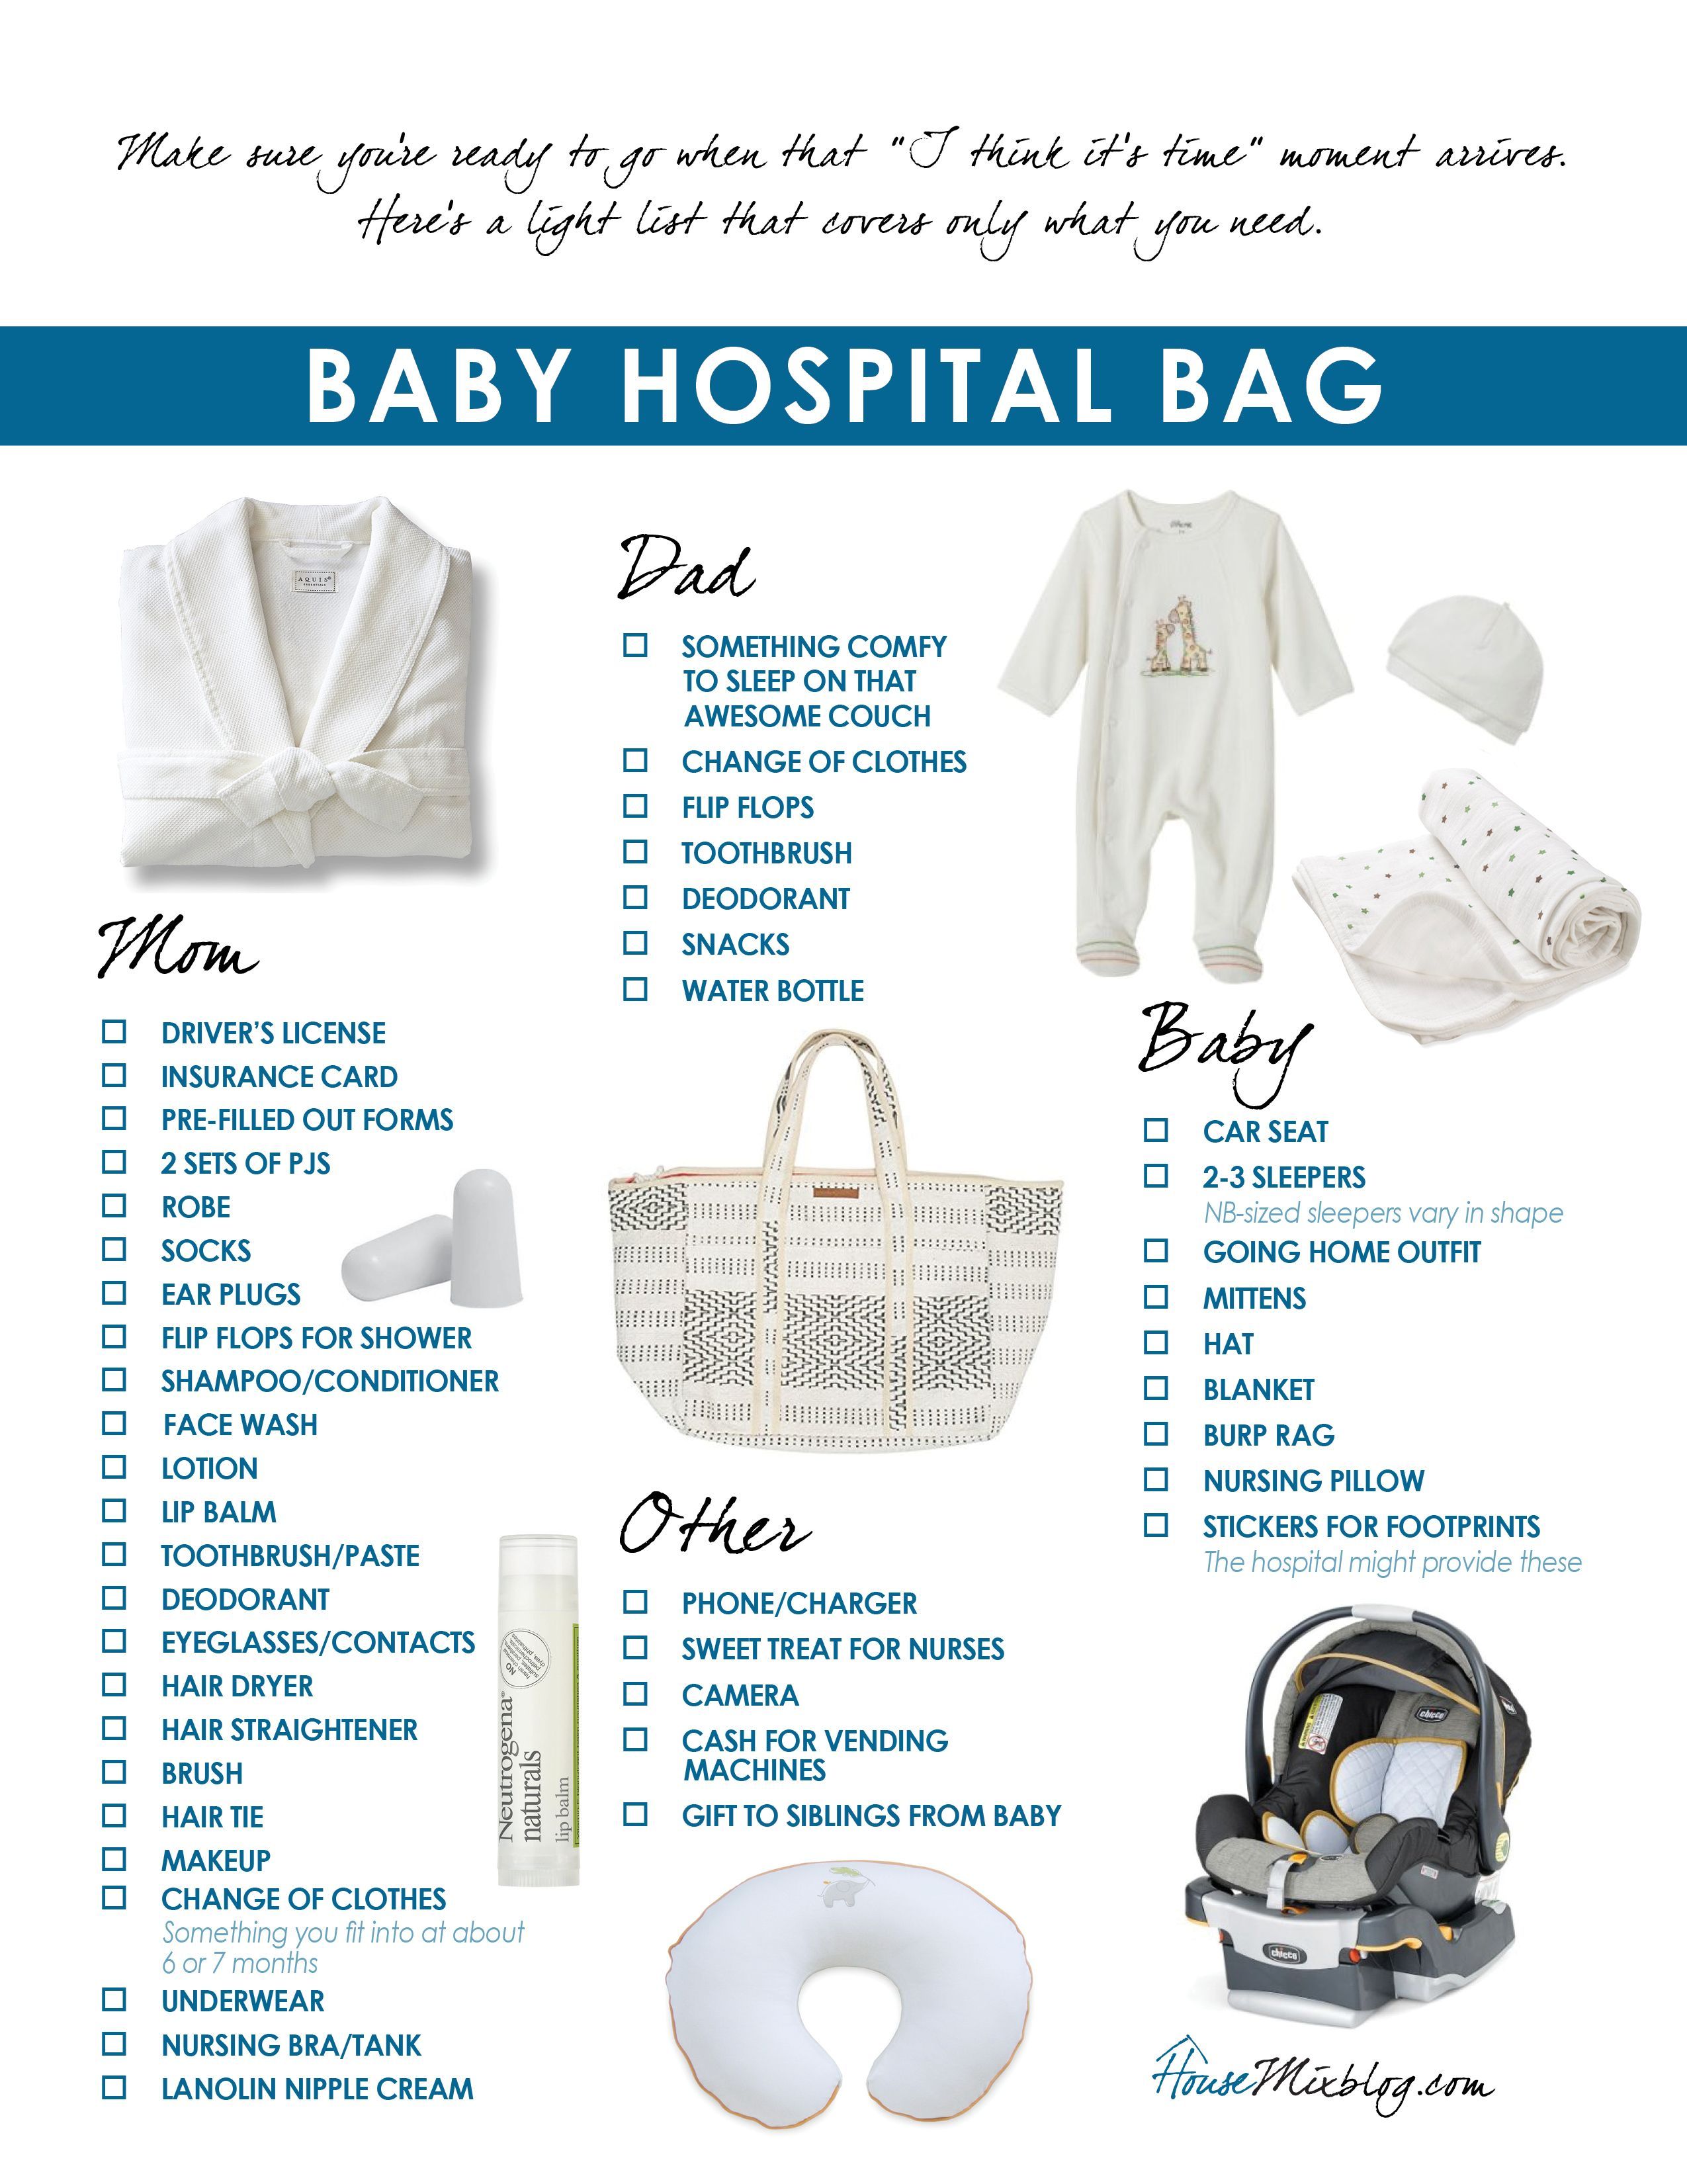 What to pack in your baby hospital bag – printable checklist